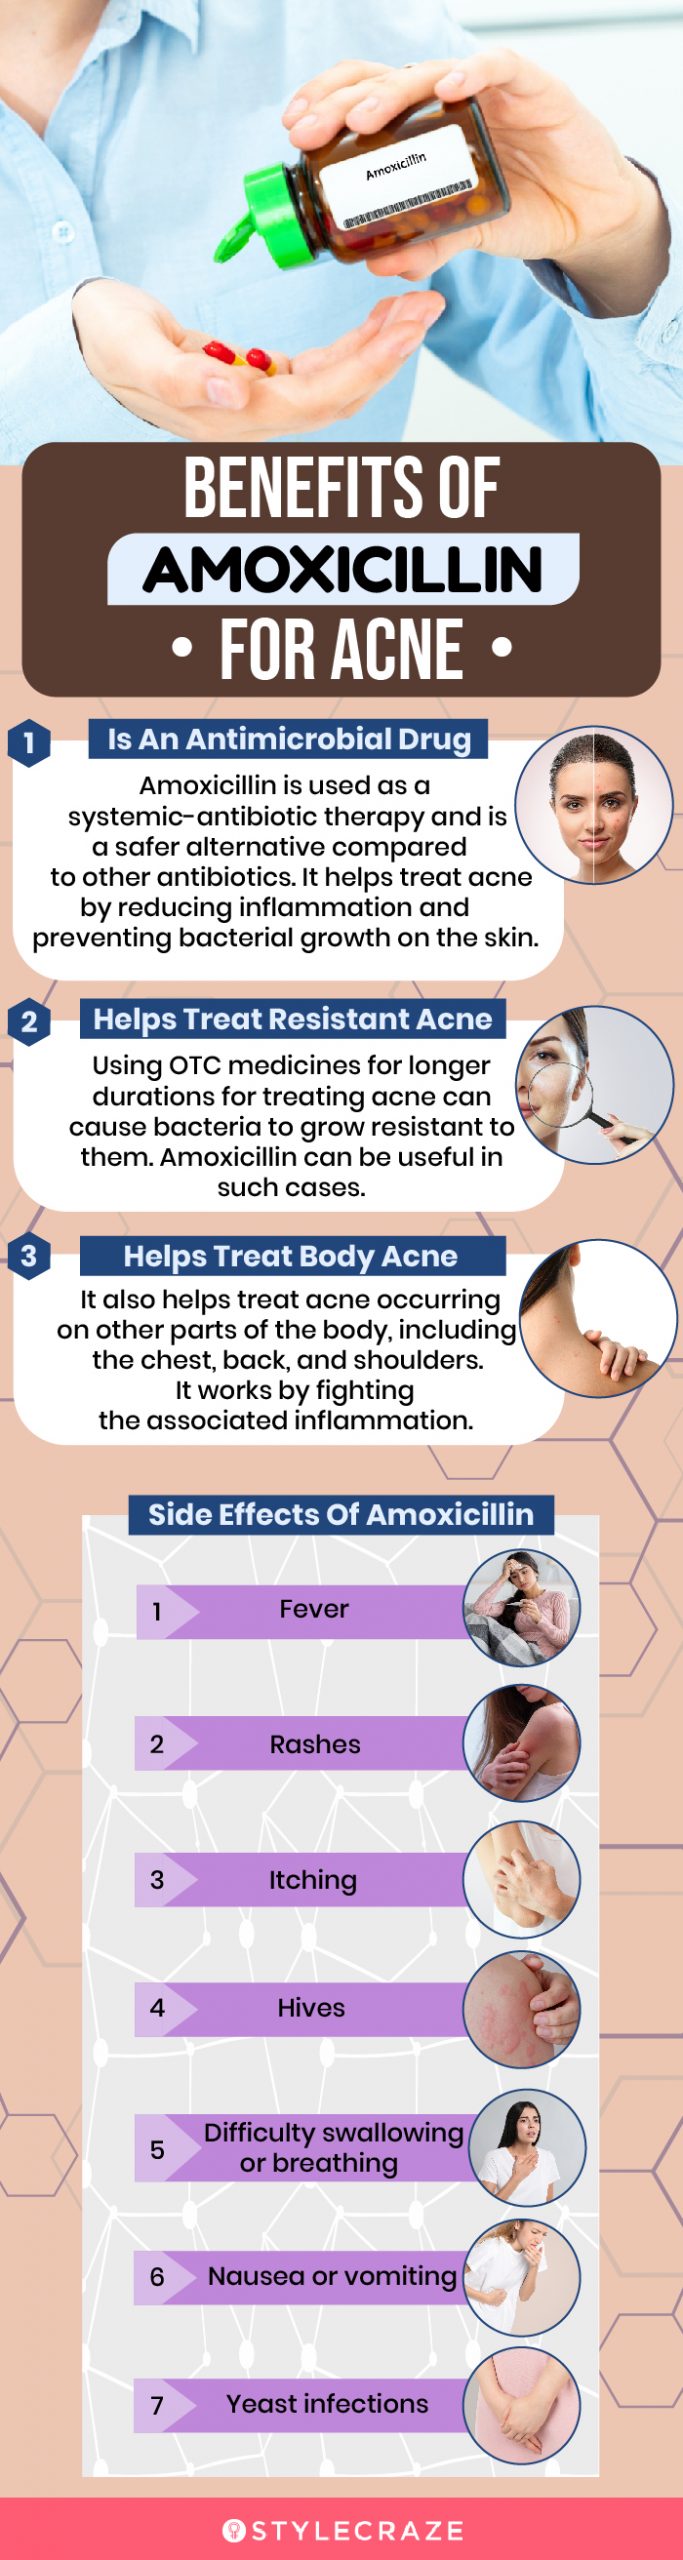 benefits of amoxicillin for acne (infographic)